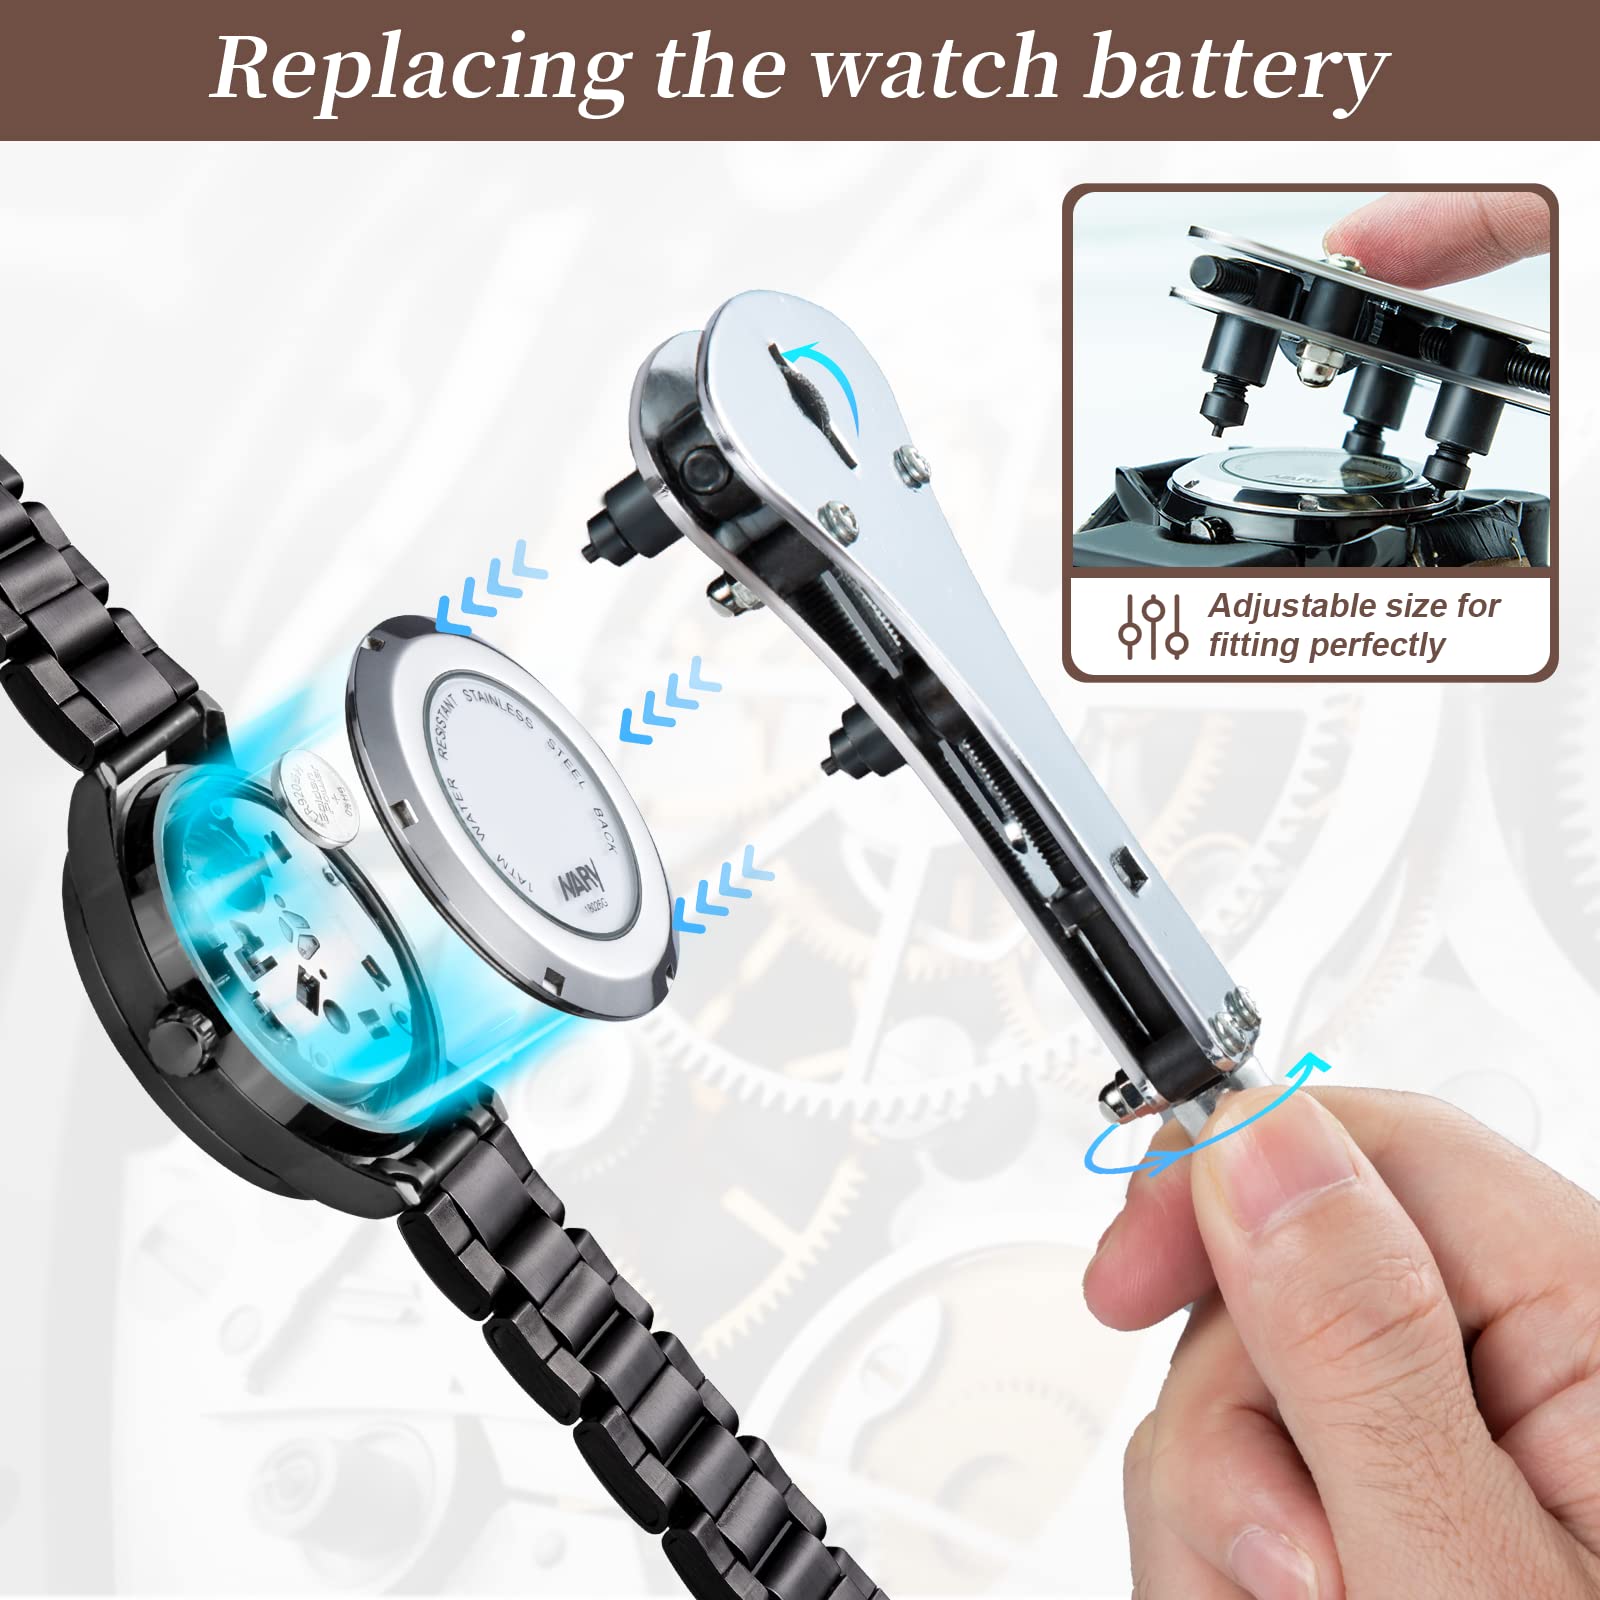 【Combination Version】Eventronic Watch Repair Tool Kit + Watch Press Set, Professional Spring Bar Tool Set,Watch Band Link Pin Tool Set with Carrying Case, Watch Battery Replacement Tool Kits